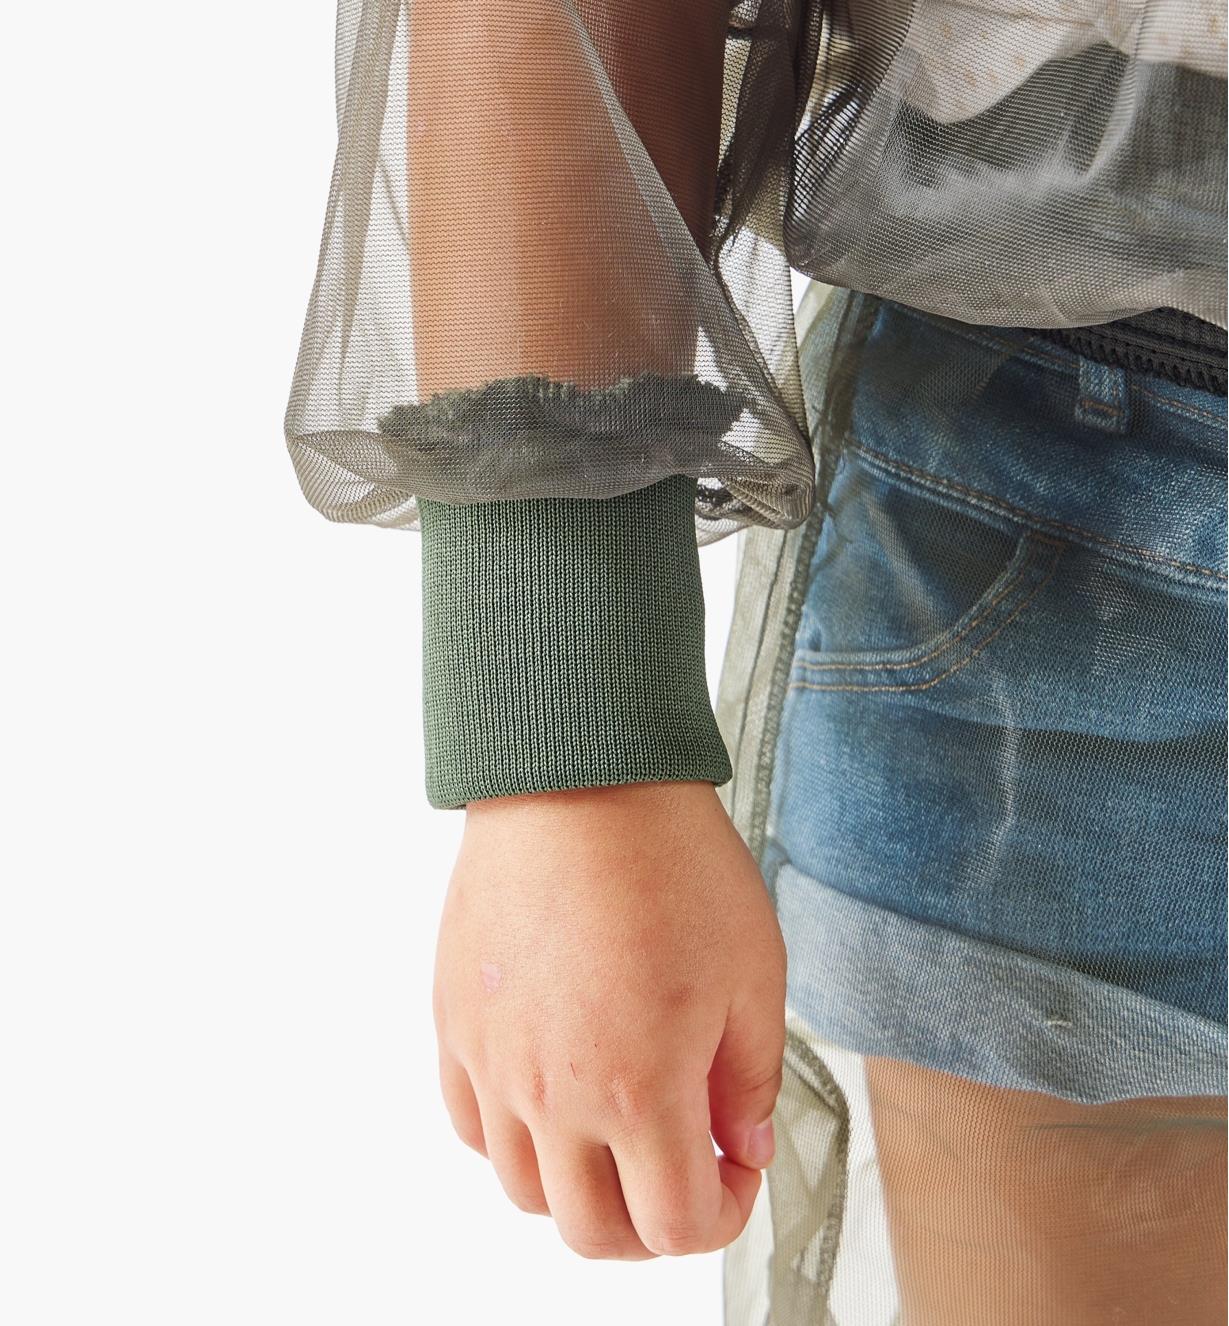 A close-up view of a full-width rib-knit wrist cuff on a hooded bug-protection shirt worn by a child